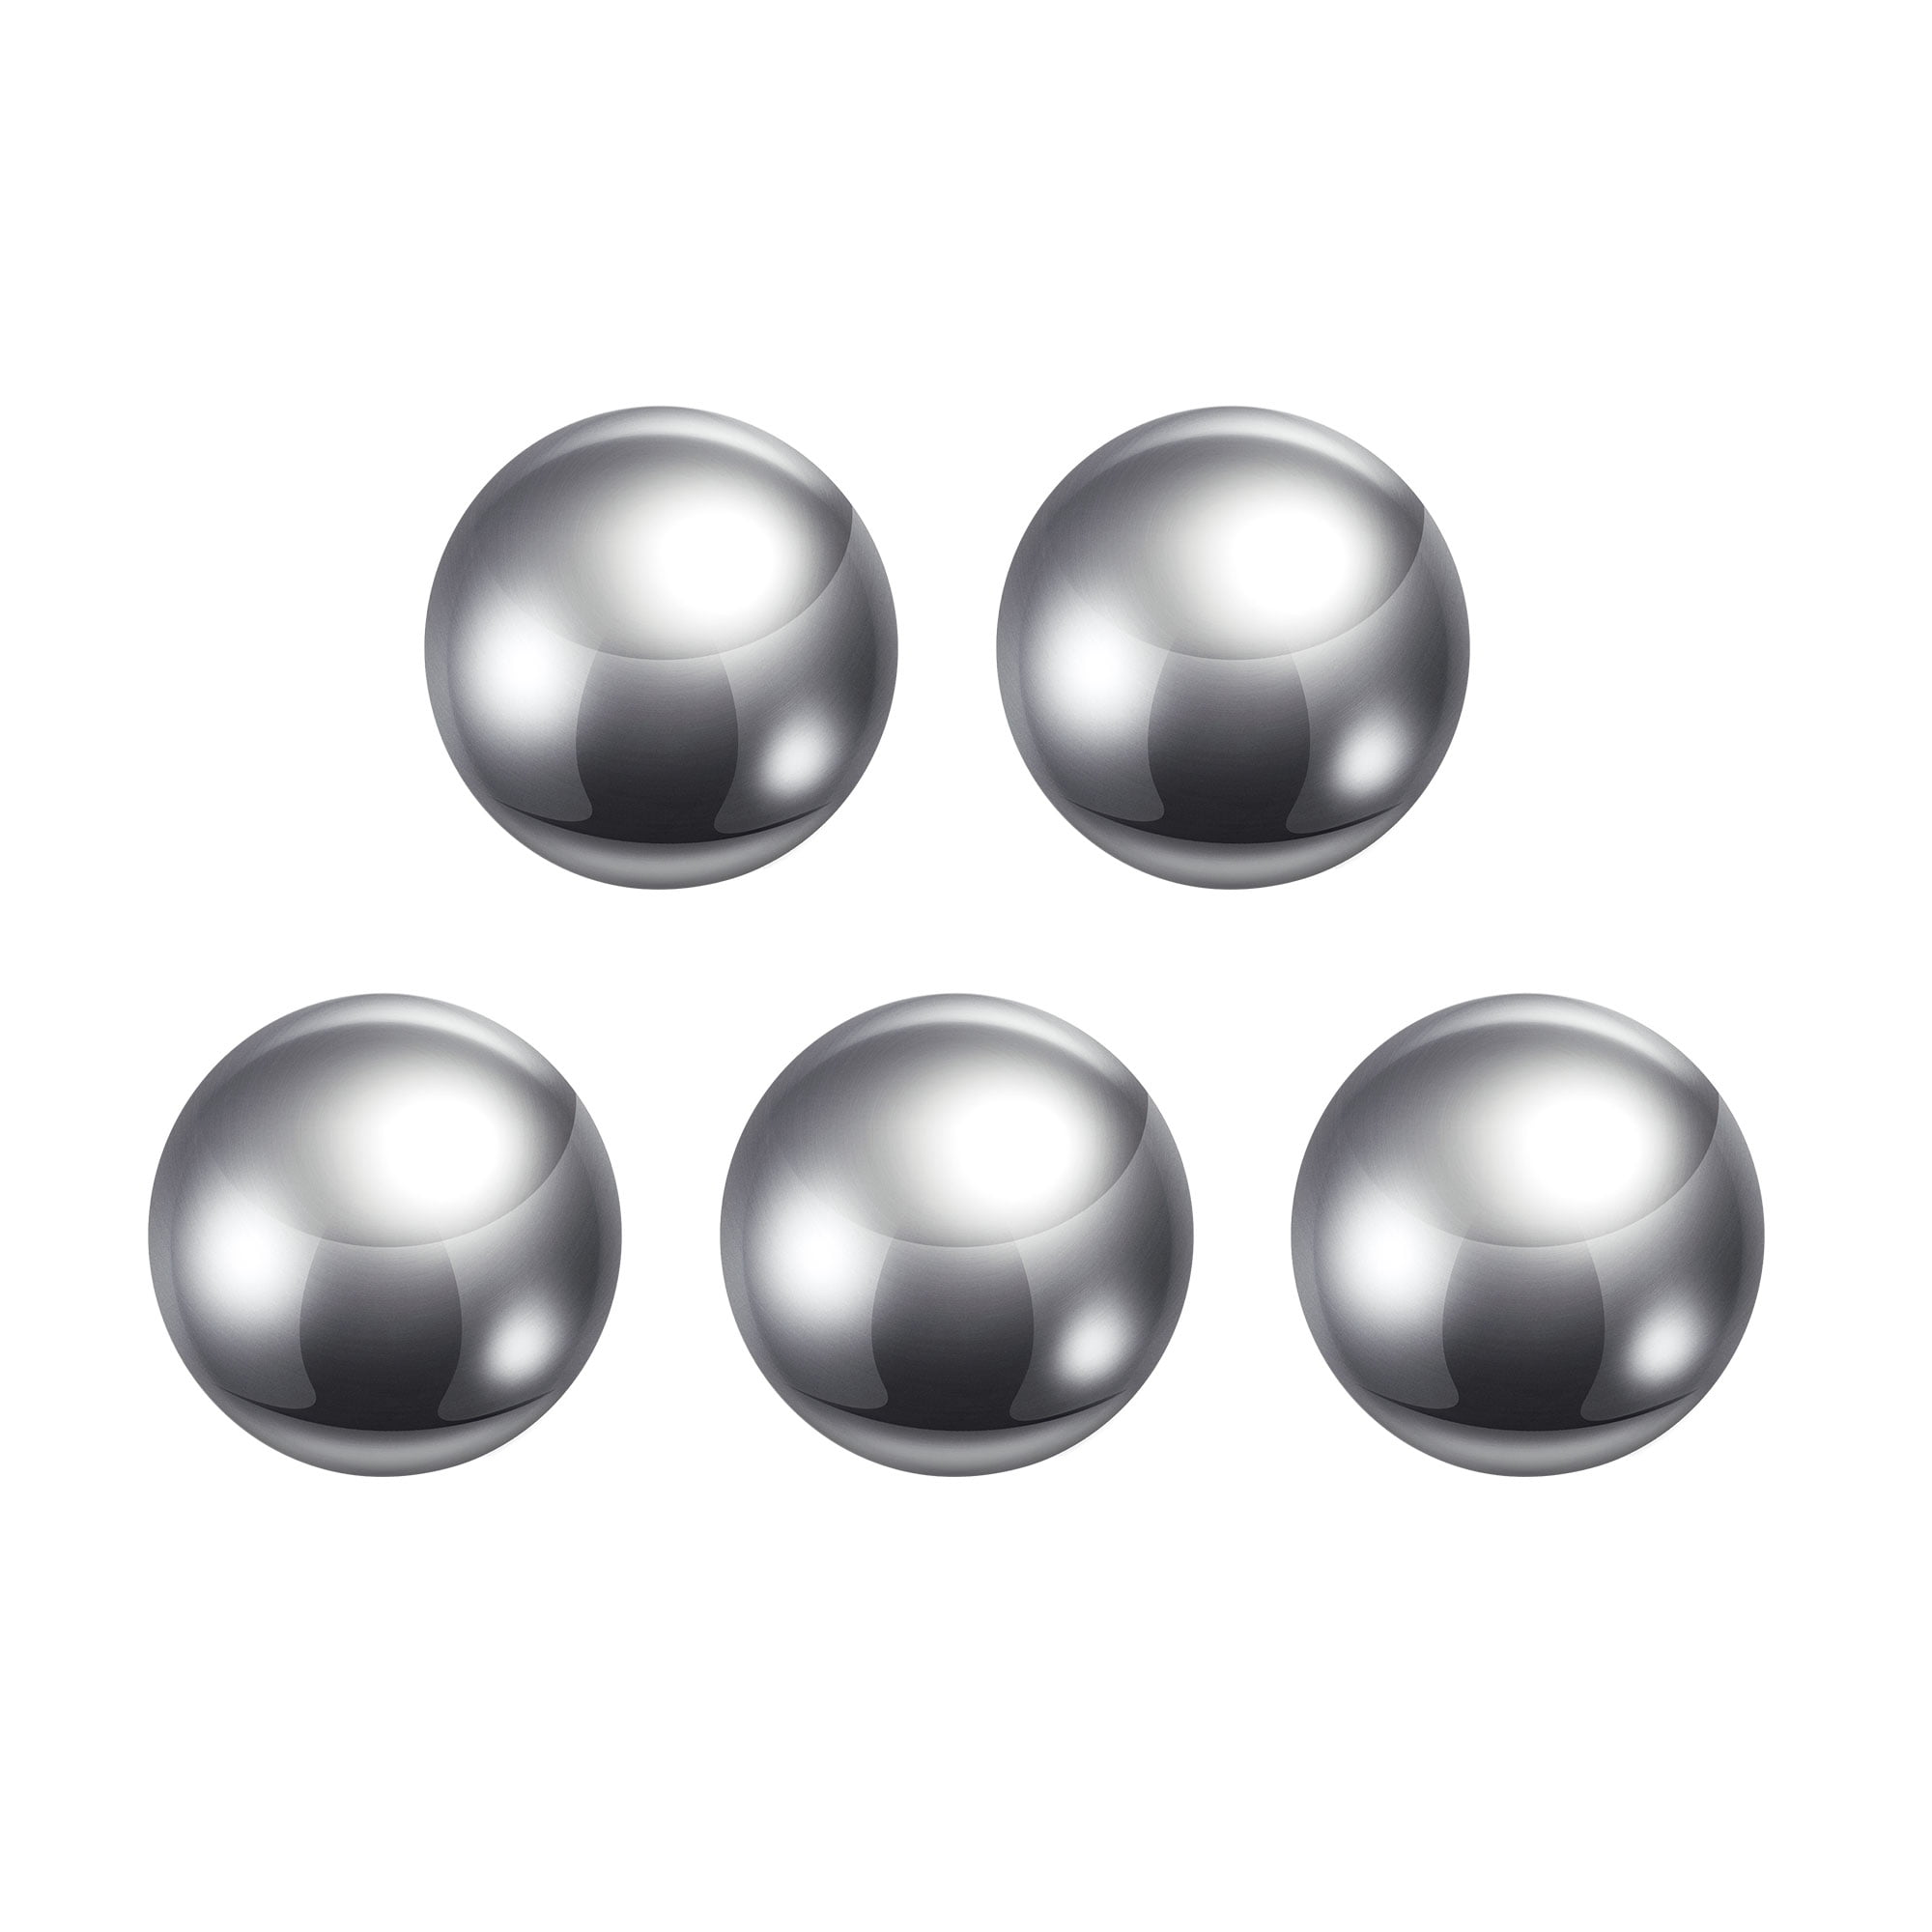 uxcell 1/8-inch Bearing Balls 316L Stainless Steel G100 Precision Balls 50pcs 